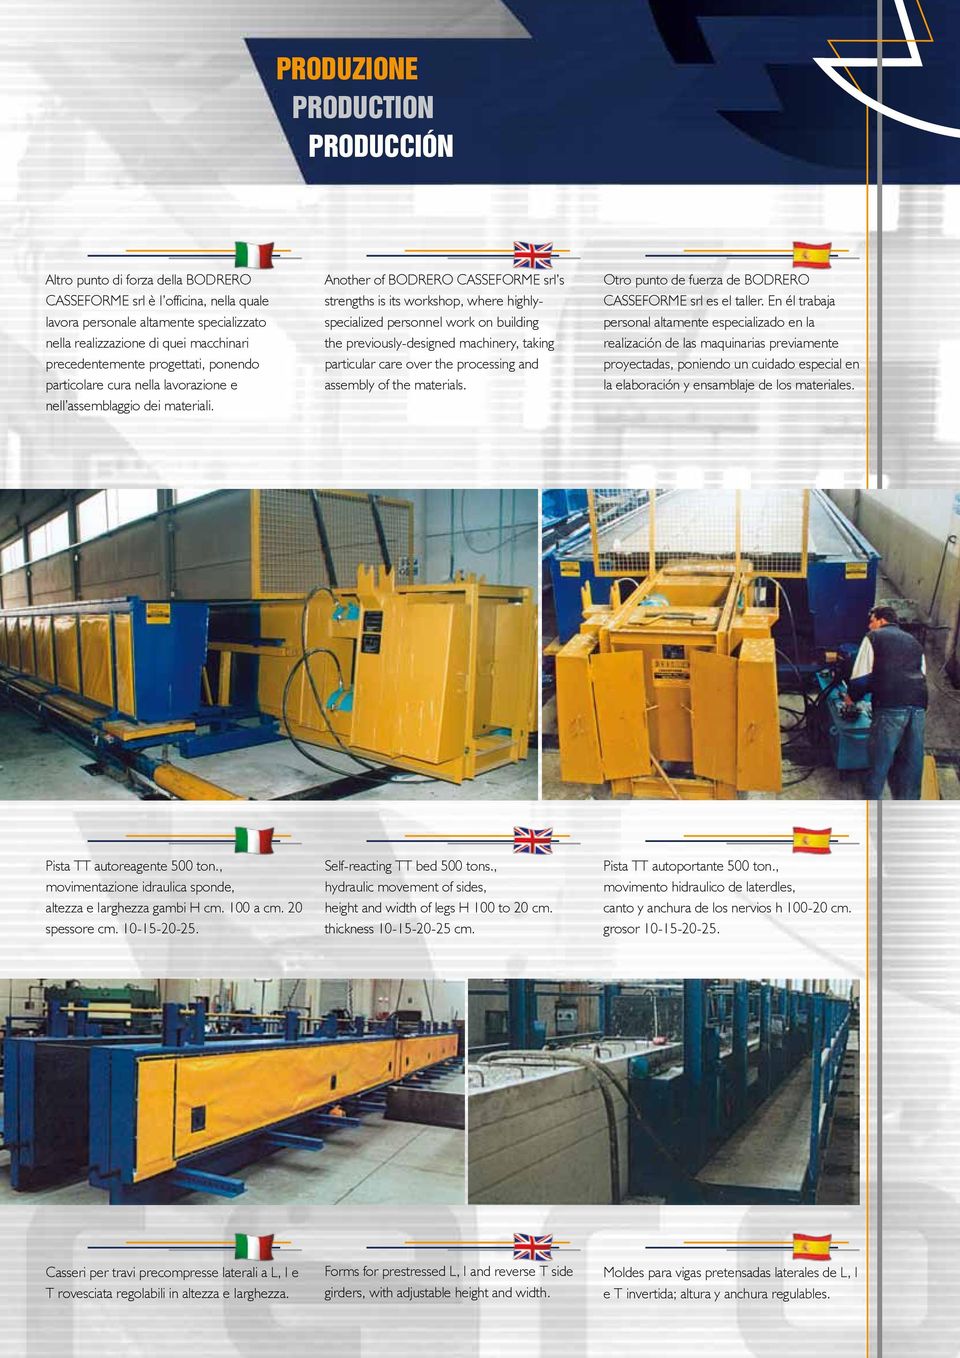 Another of BODRERO CASSEFORME srl s strengths is its workshop, where highlyspecialized personnel work on building the previously-designed machinery, taking particular care over the processing and